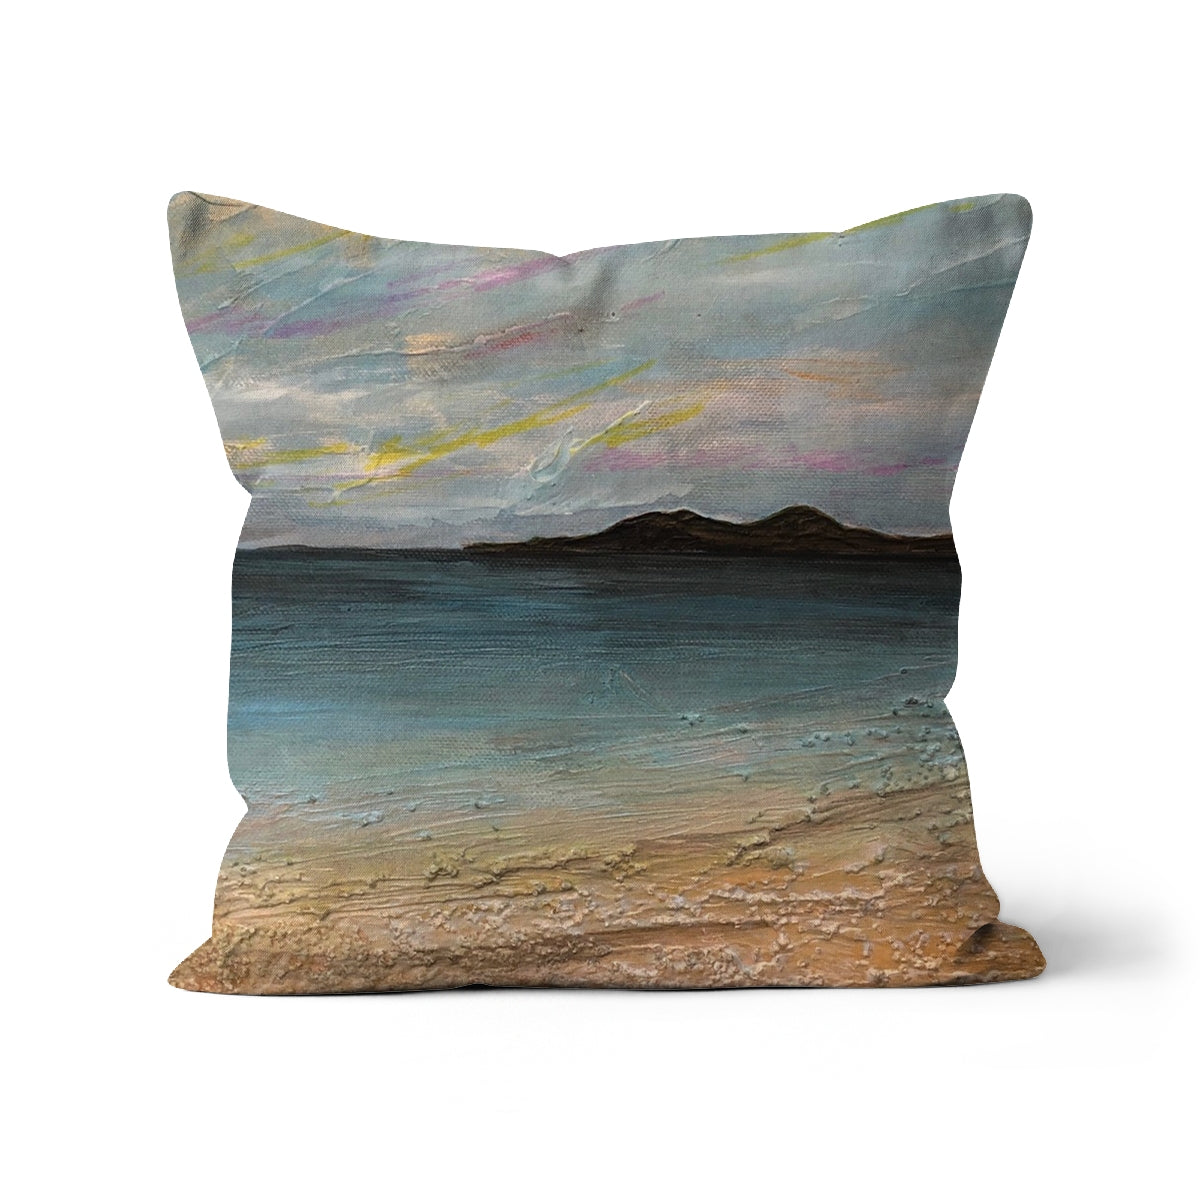 Garrynamonie Beach South Uist Art Gifts Cushion-Cushions-Hebridean Islands Art Gallery-Faux Suede-22"x22"-Paintings, Prints, Homeware, Art Gifts From Scotland By Scottish Artist Kevin Hunter